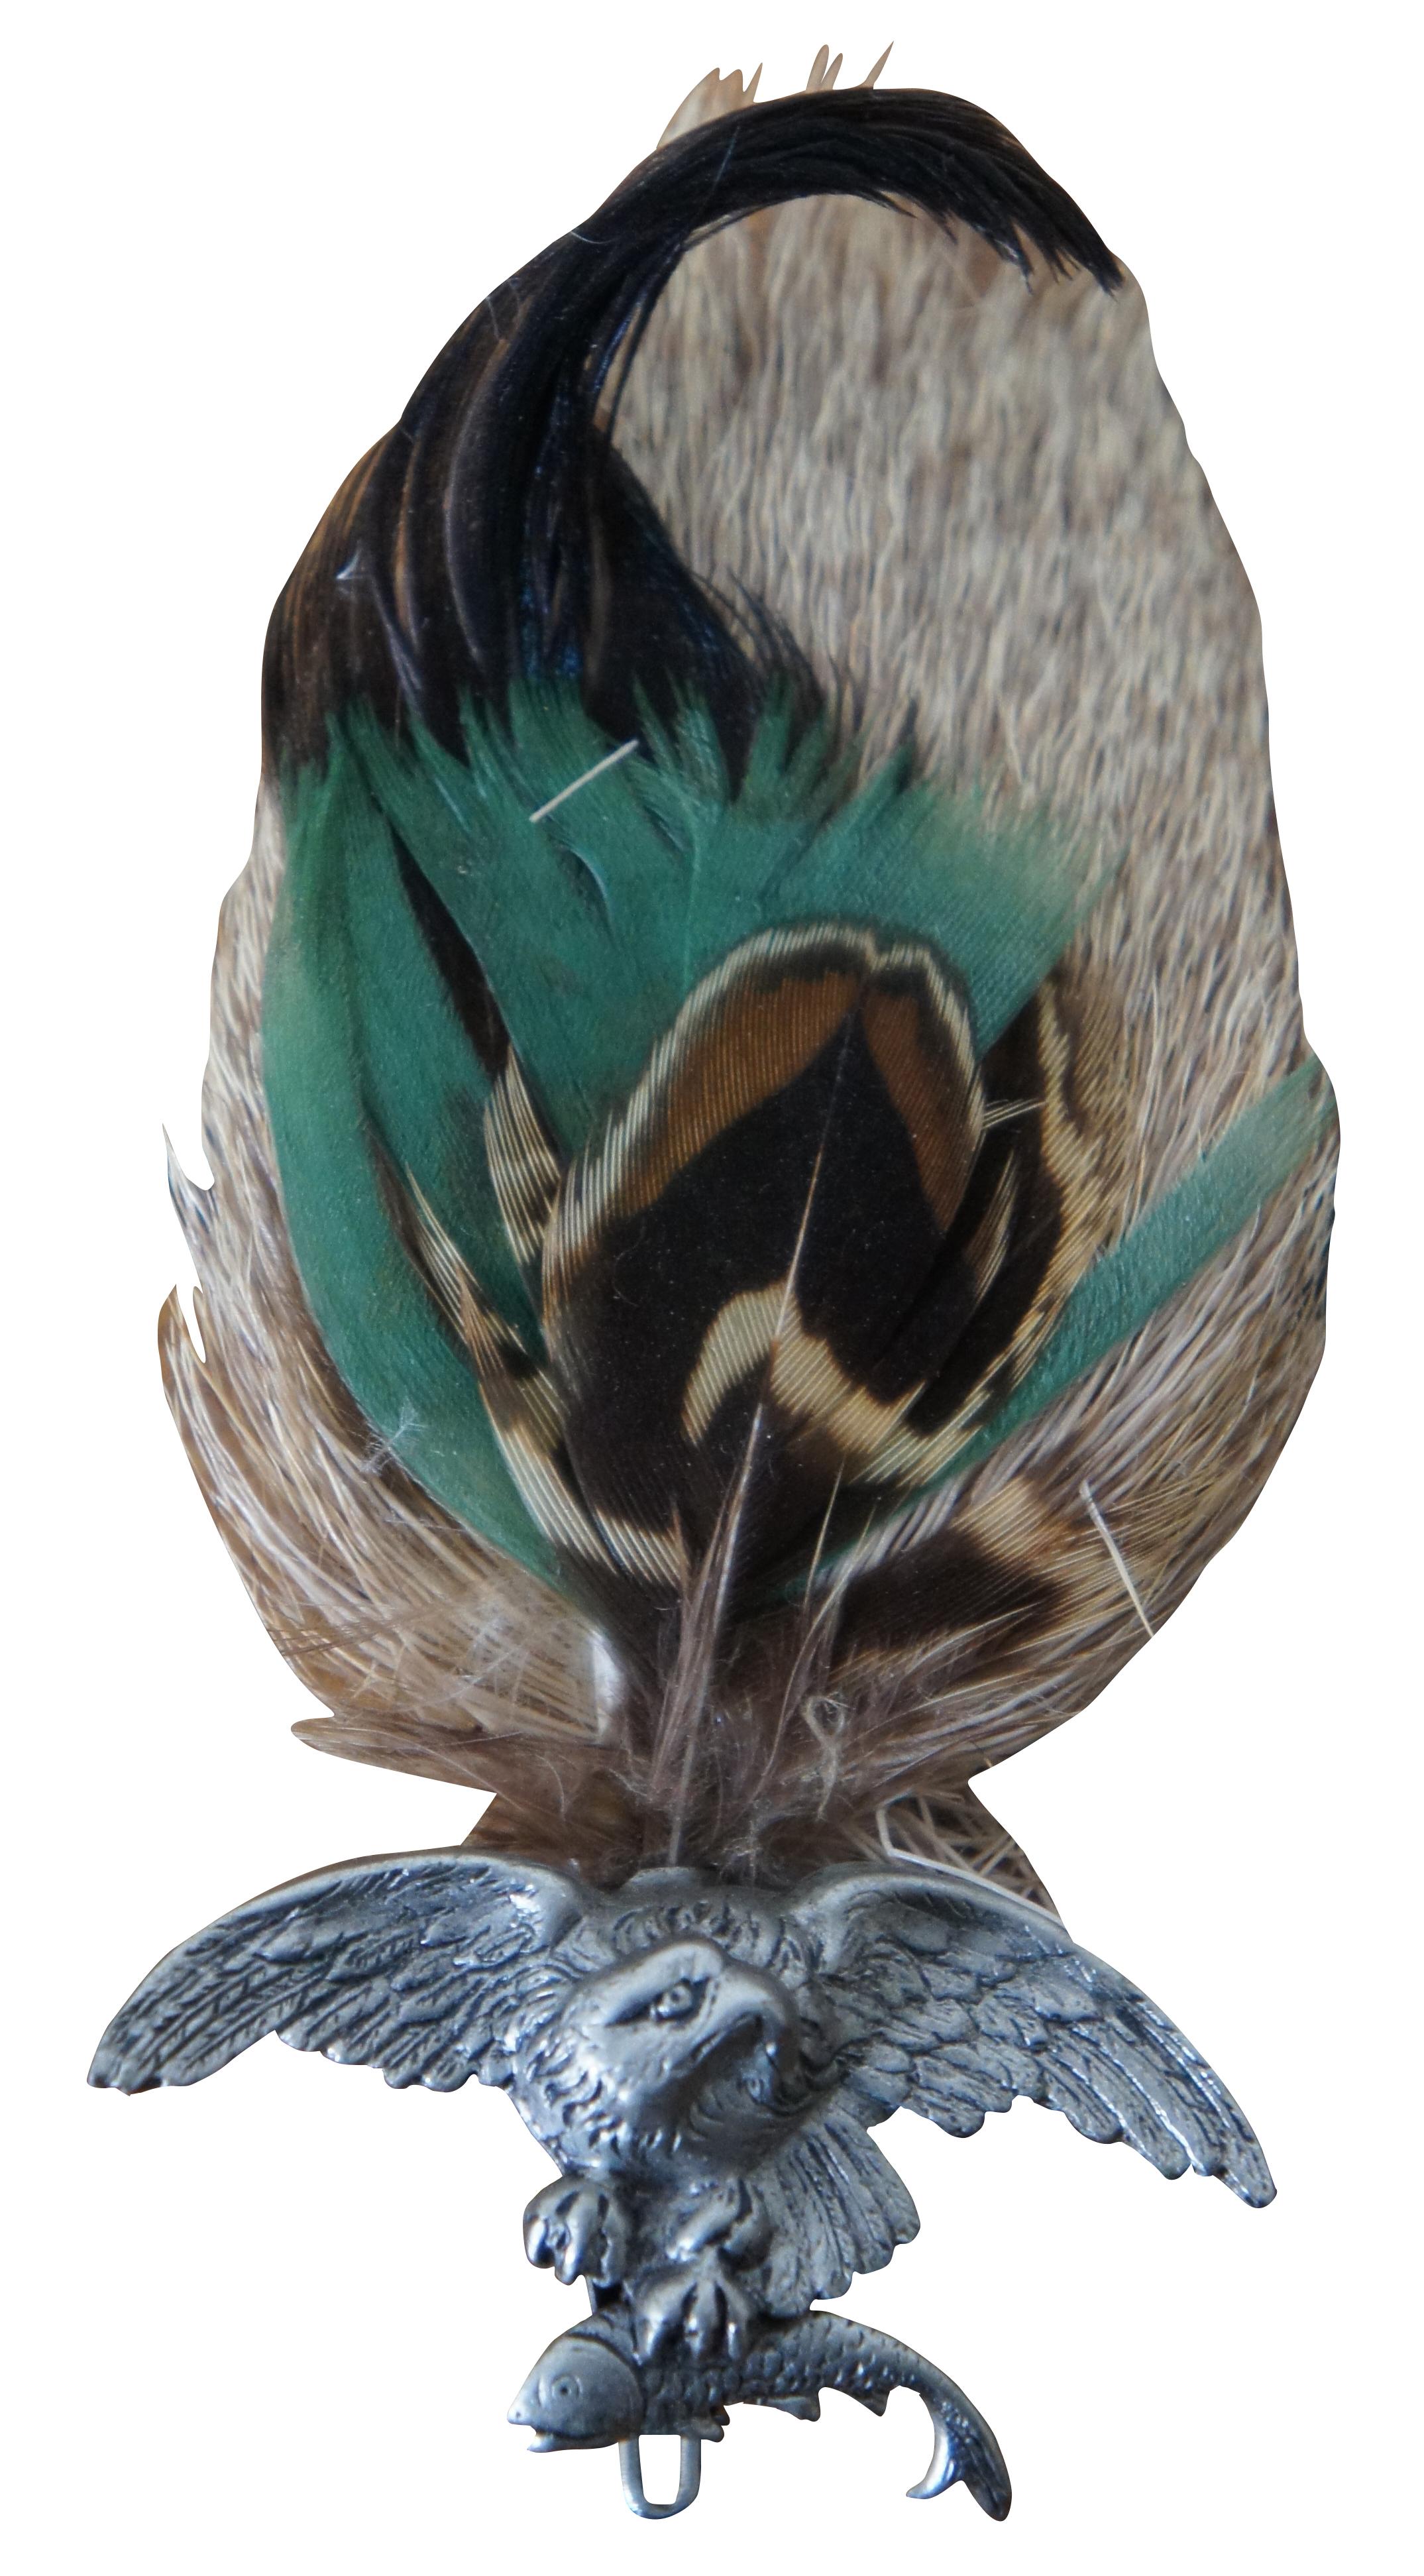 Pair of two rare mid century German / Austrian hat pins decorated with fur and feathers, one showing and eagle with a fish in its talons and the other a pheasant or grouse on a branch. Traditionally worn on alpine climbing or hunter's hats and often